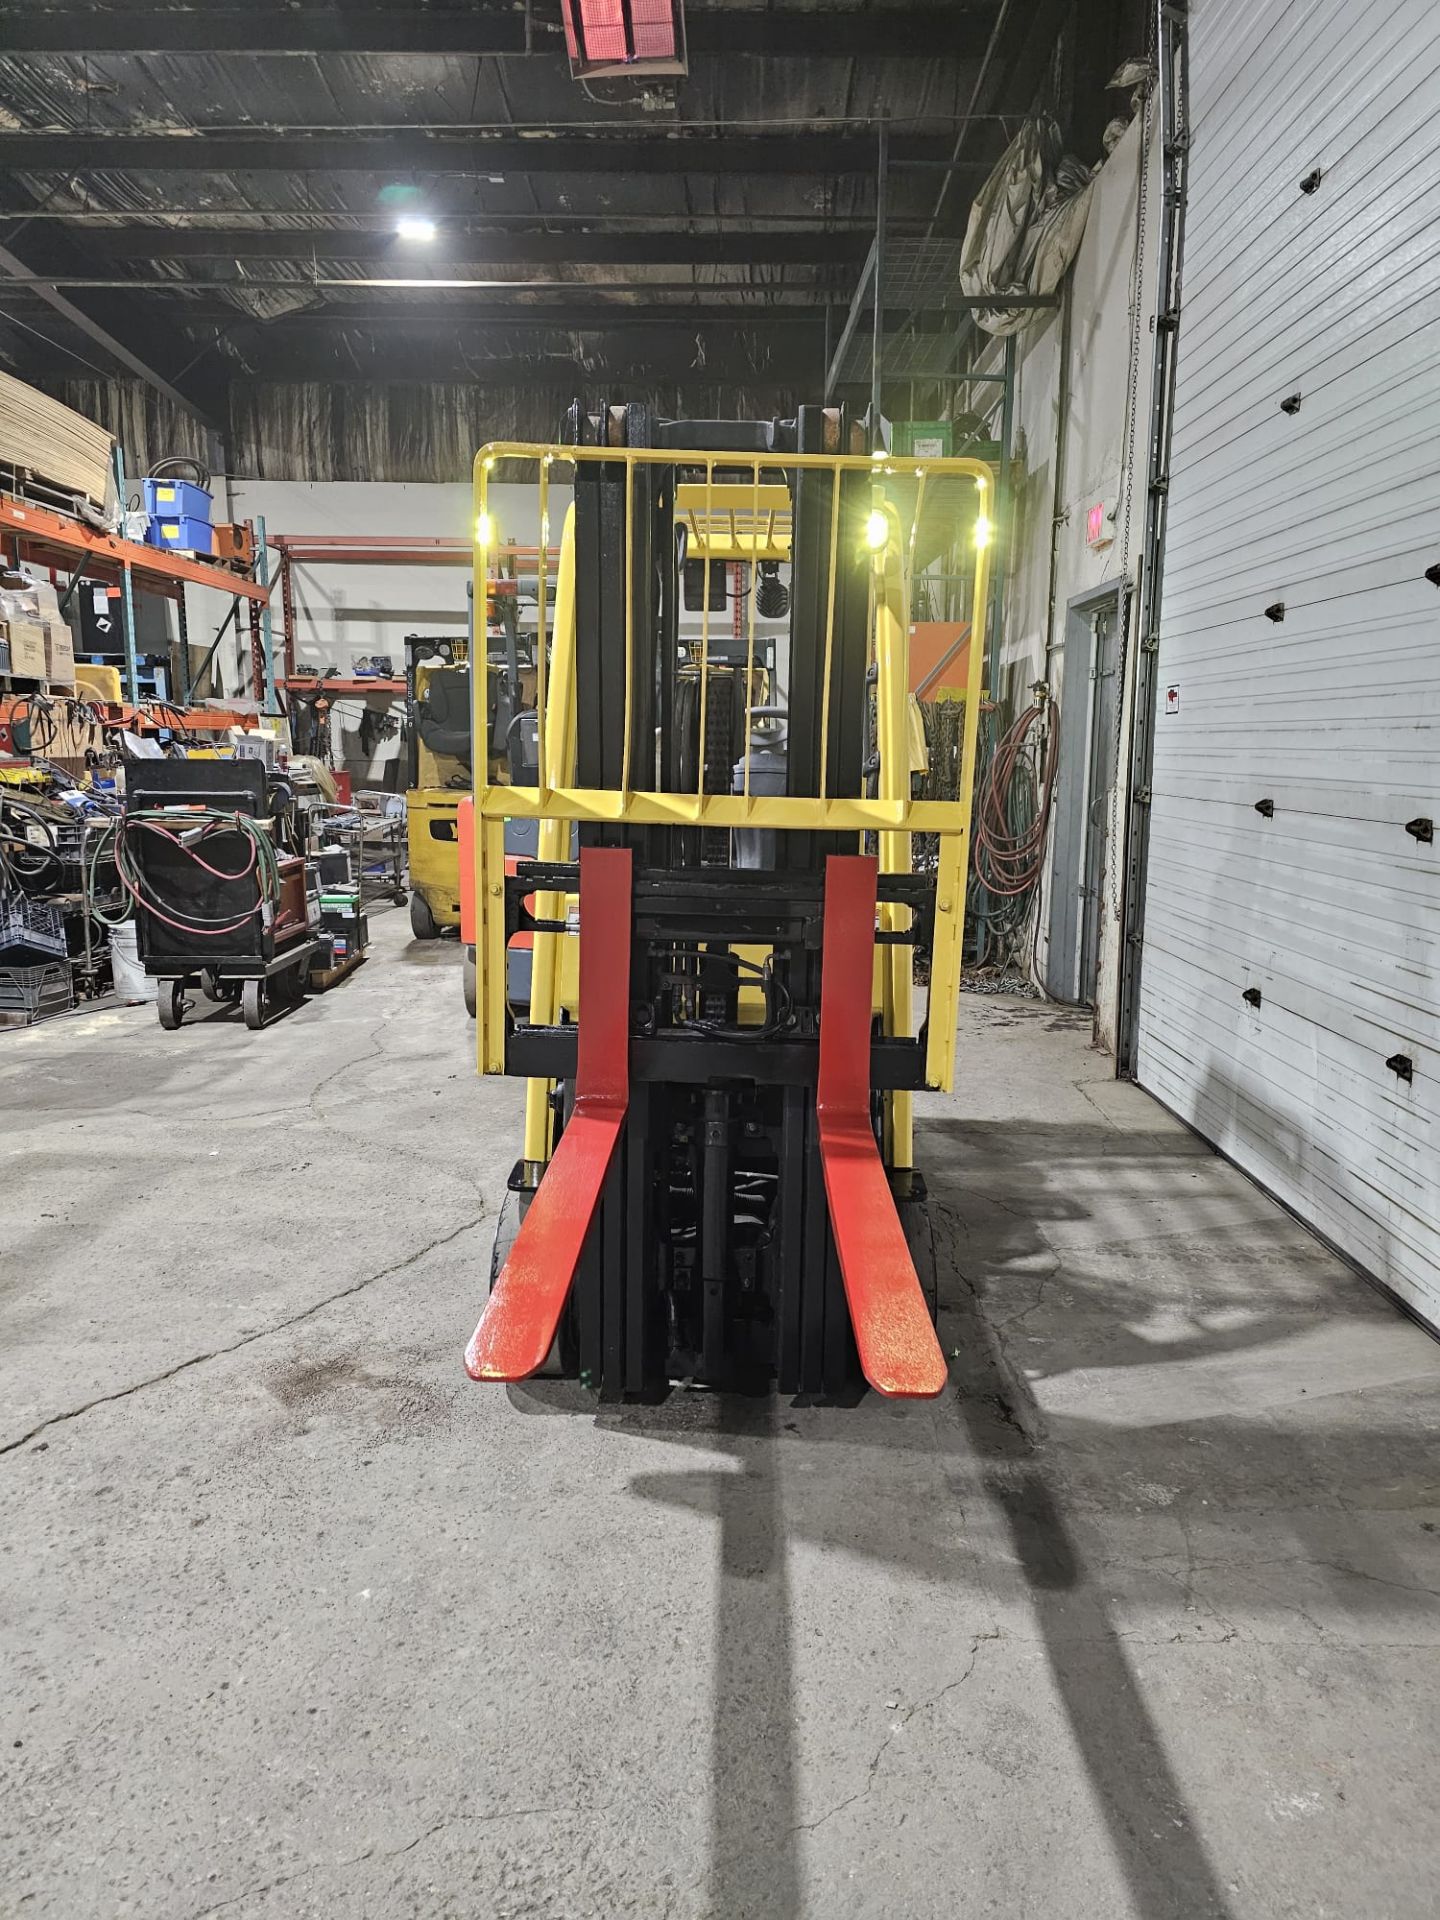 2015 Hyster 4,000lbs Capacity LPG (Propane) Forklift with sideshift and 3-STAGE MAST (no propane - Image 5 of 5